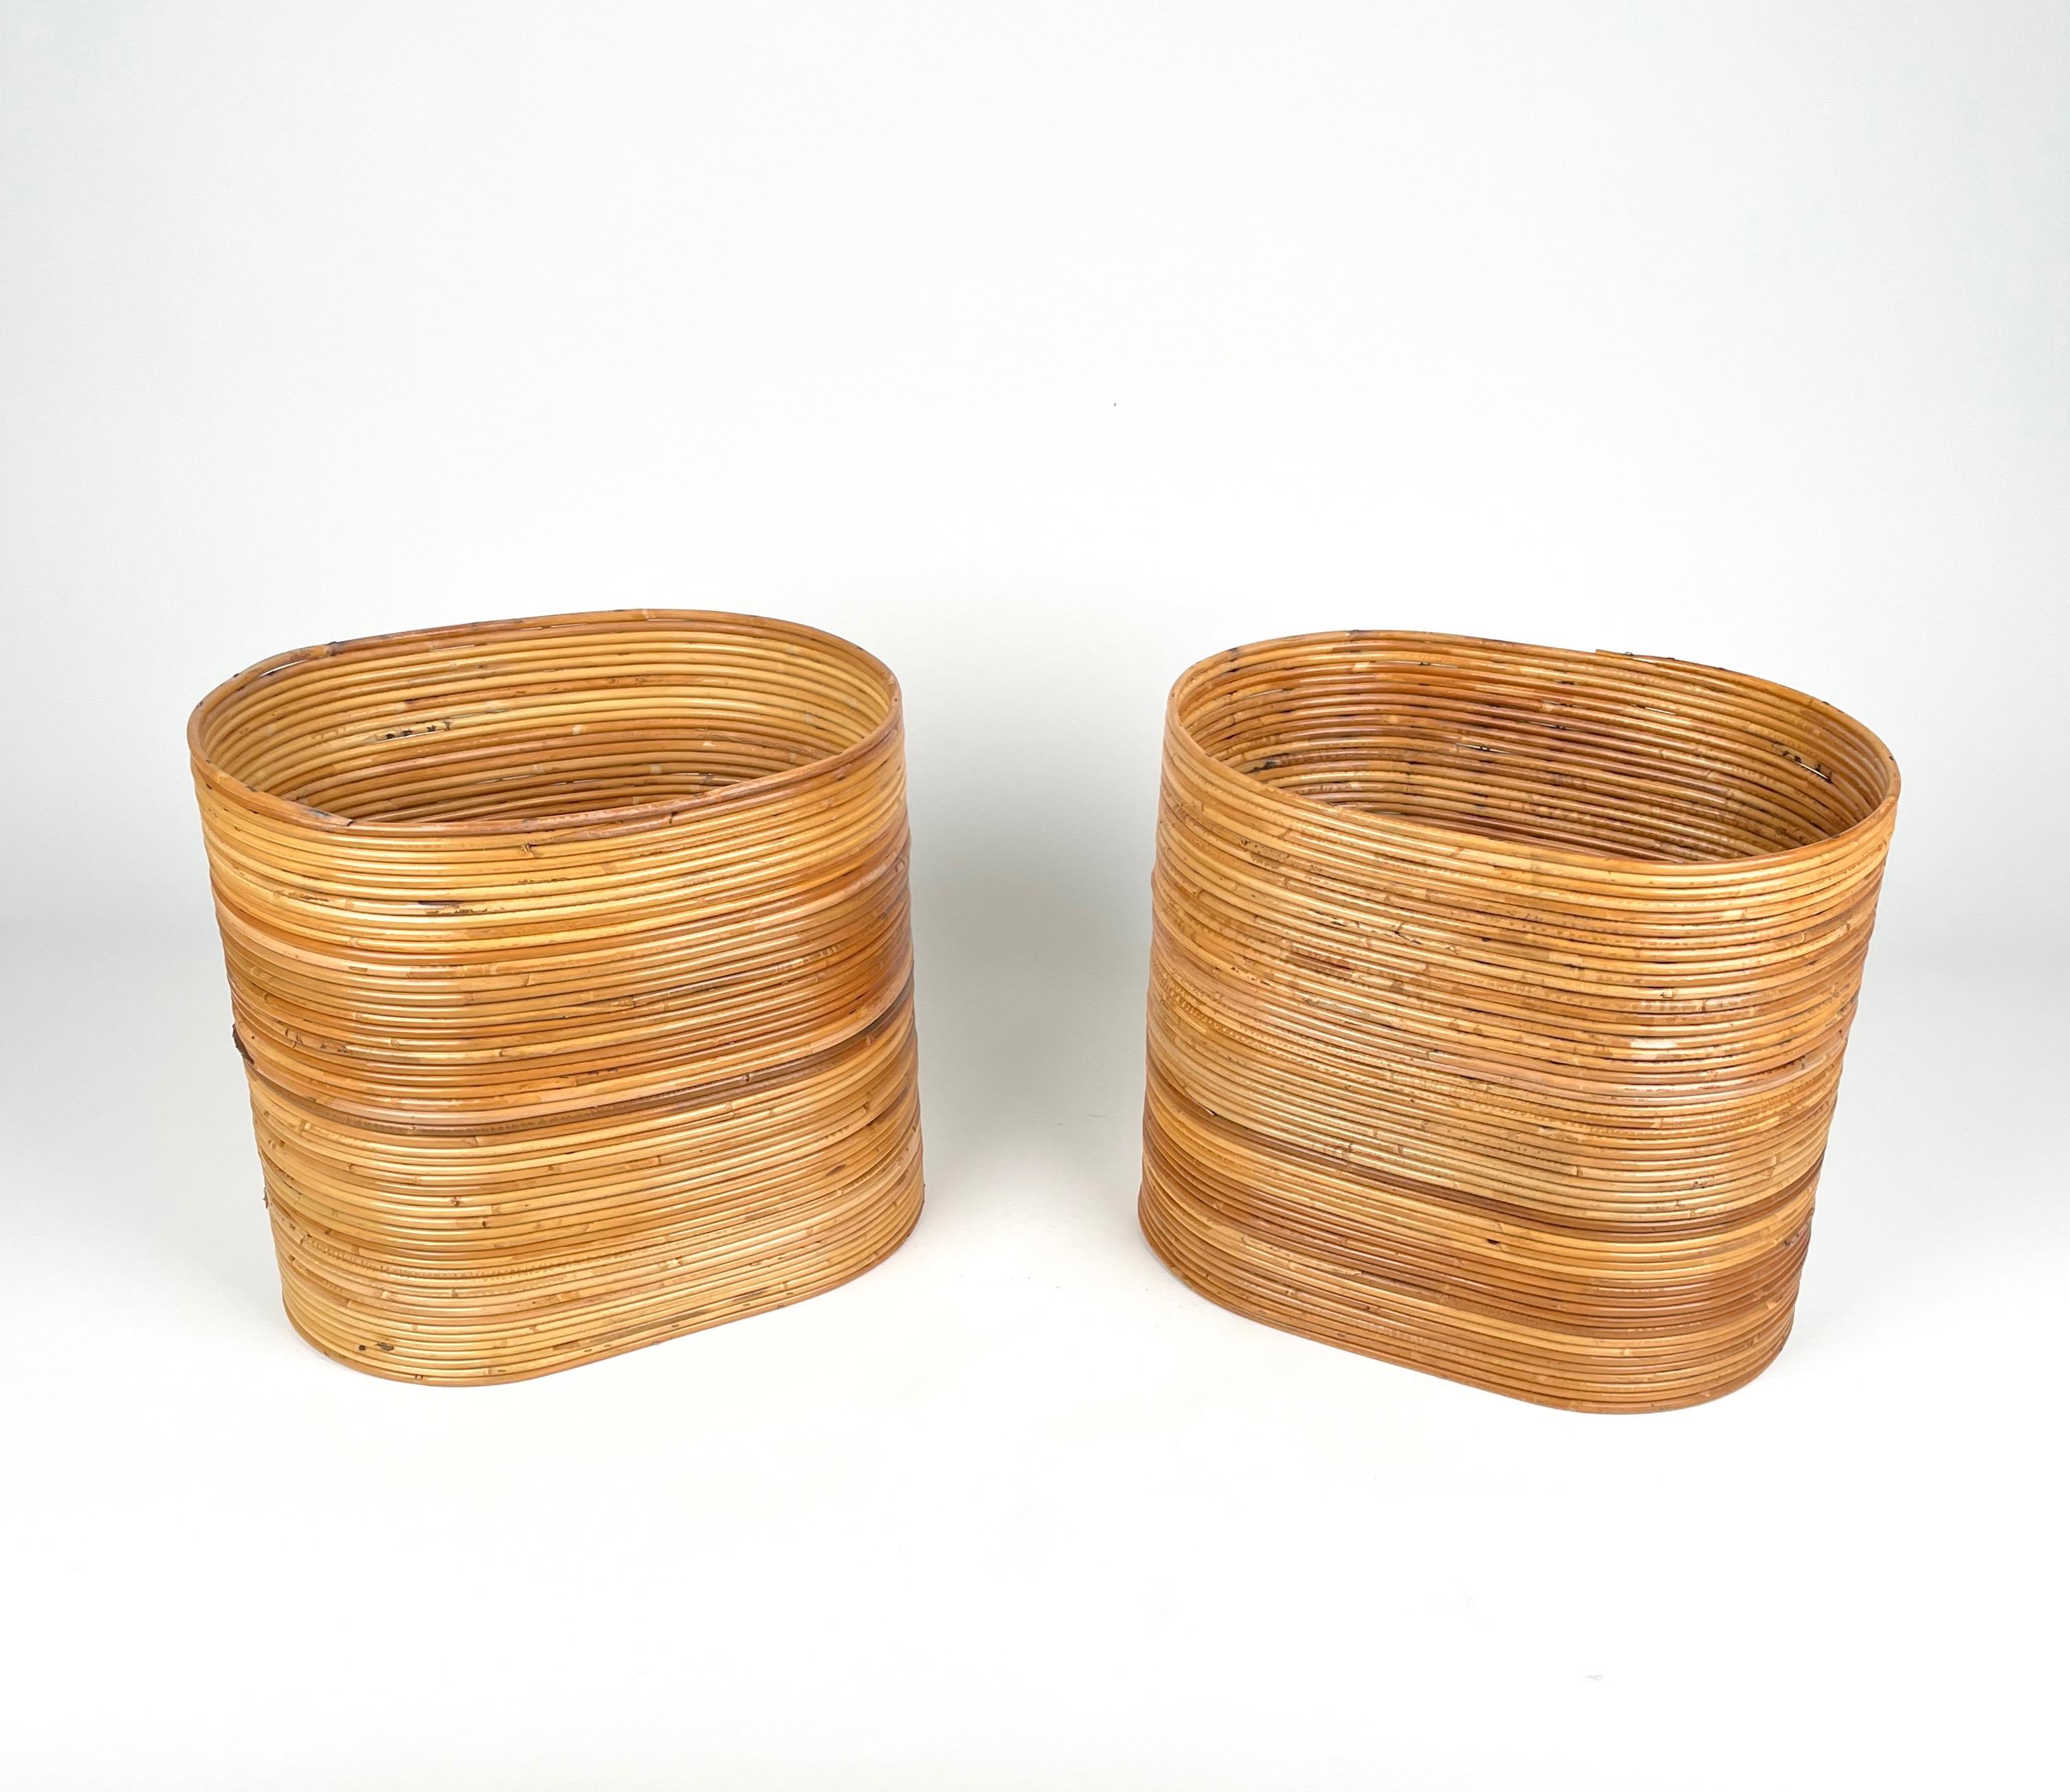 Pair of oval basket plant holder vase in bamboo and rattan made in Italy in the 1960s. 

An astonishing piece that will enrich a midcentury-style living room or studio.